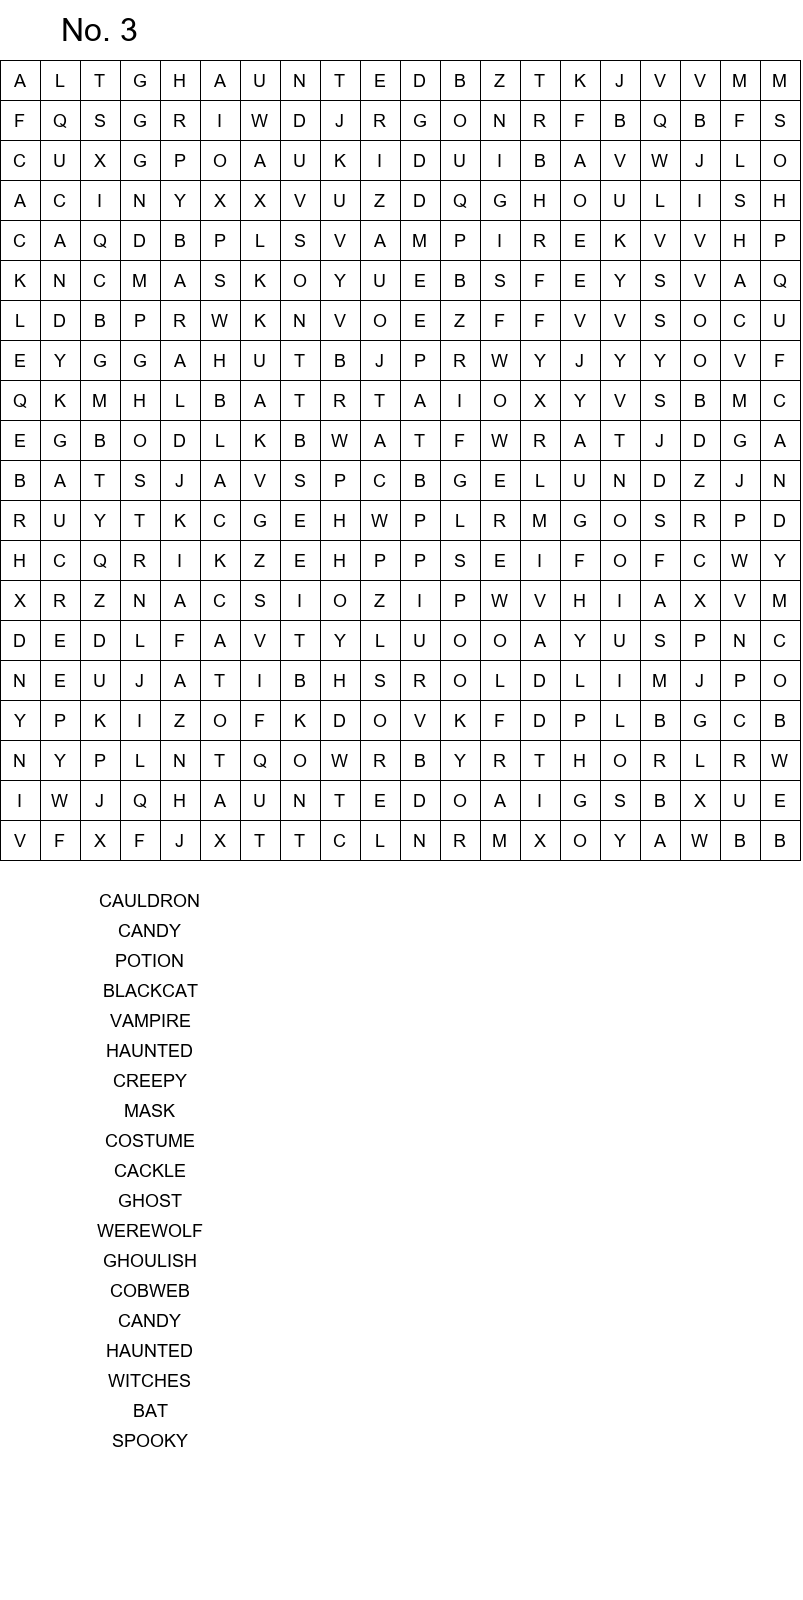 Halloween word search for middle school size 20x20 No 3